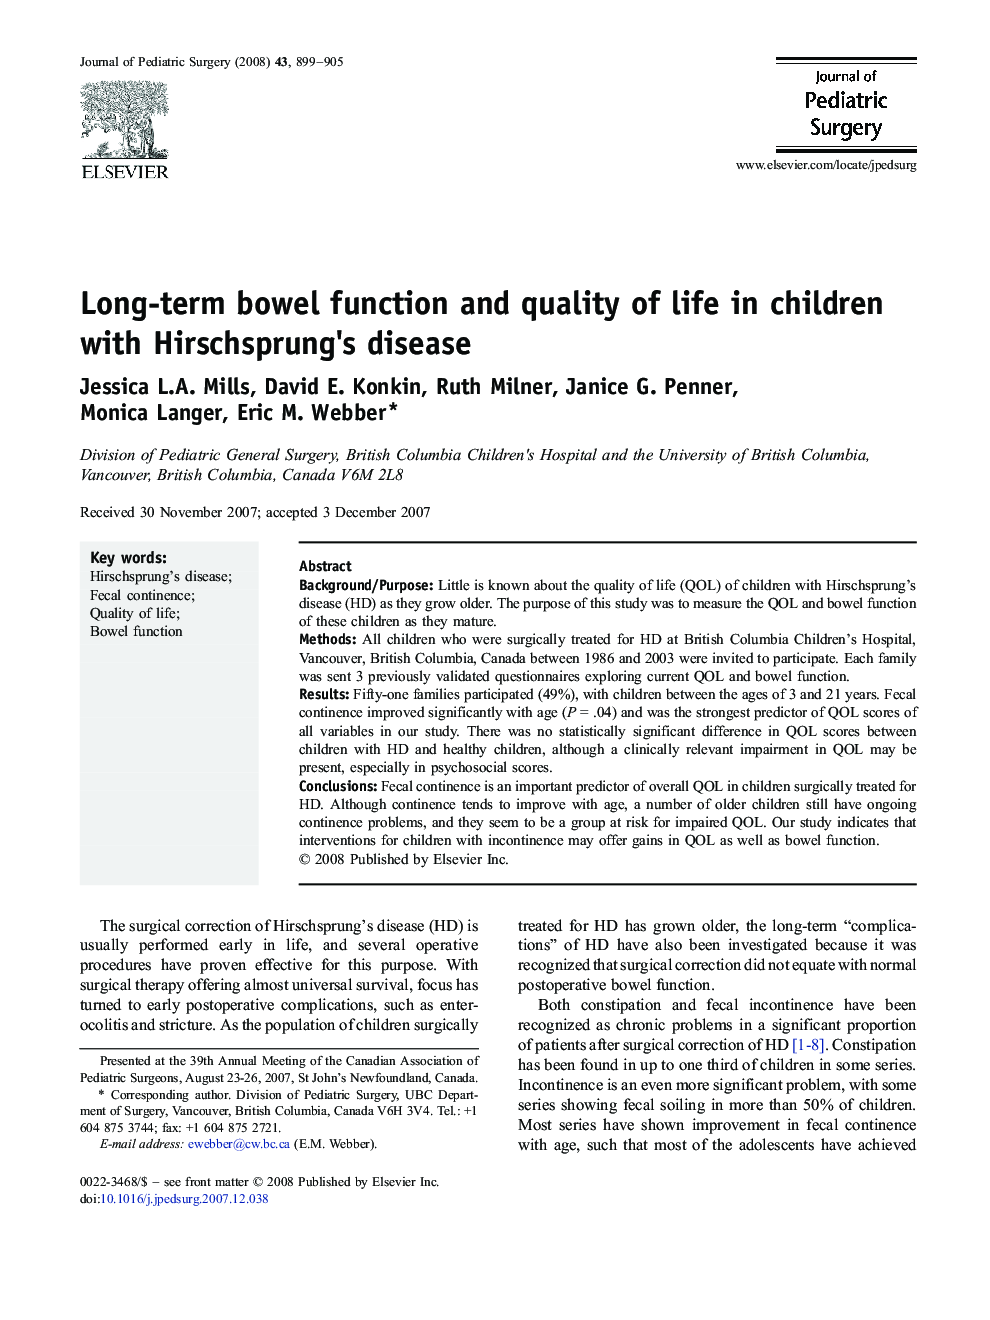 Long-term bowel function and quality of life in children with Hirschsprung's disease 